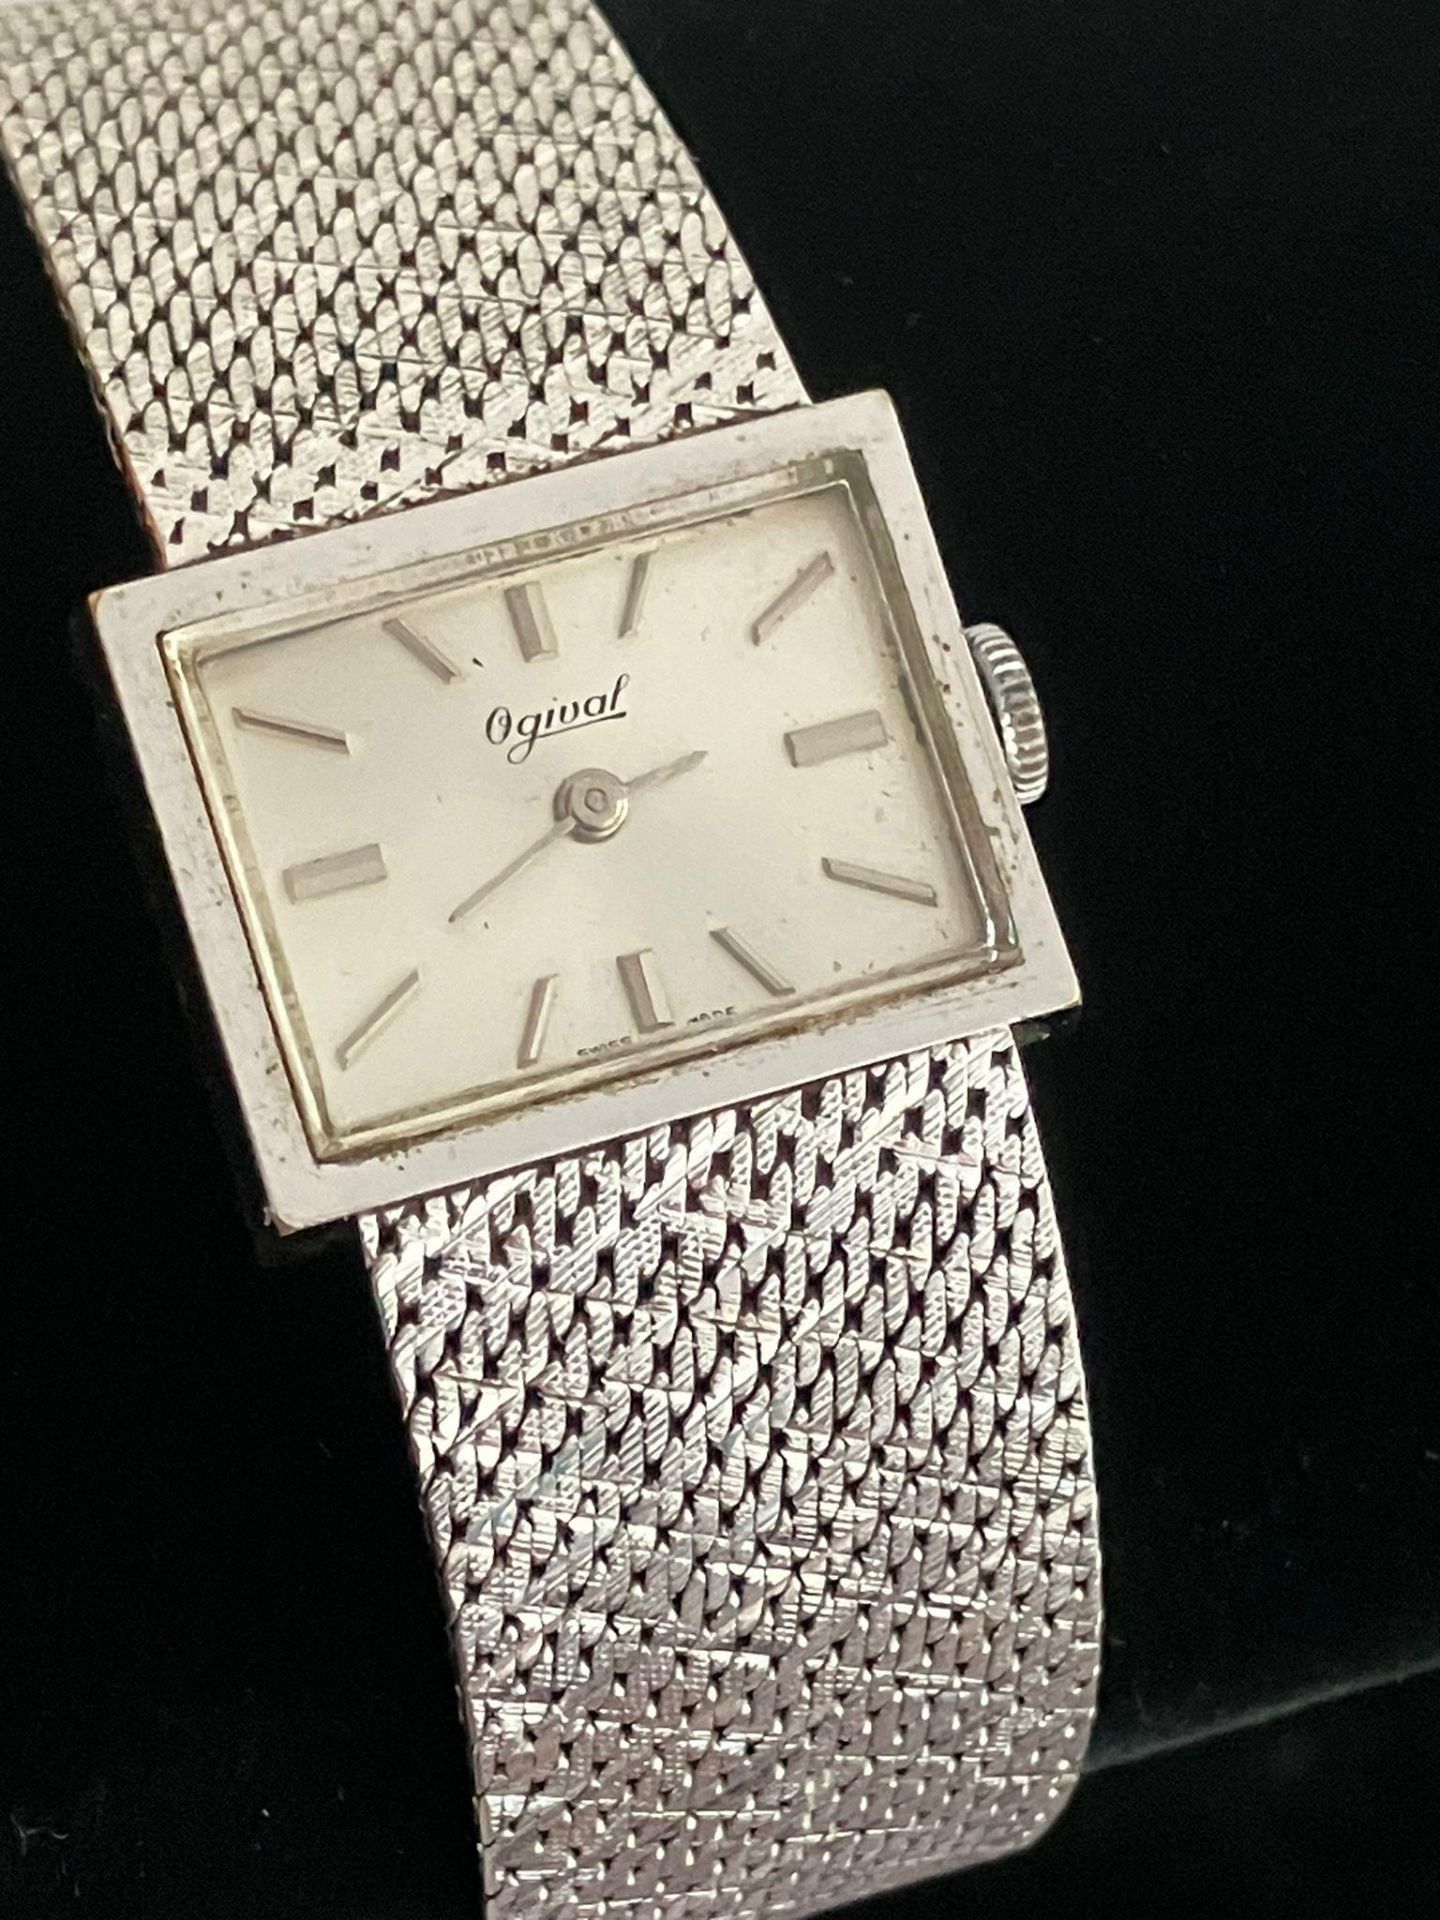 Ladies vintage 1960/70’s OGIVAL WRISTWATCH finished in Silver tone with mesh bracelet strap.